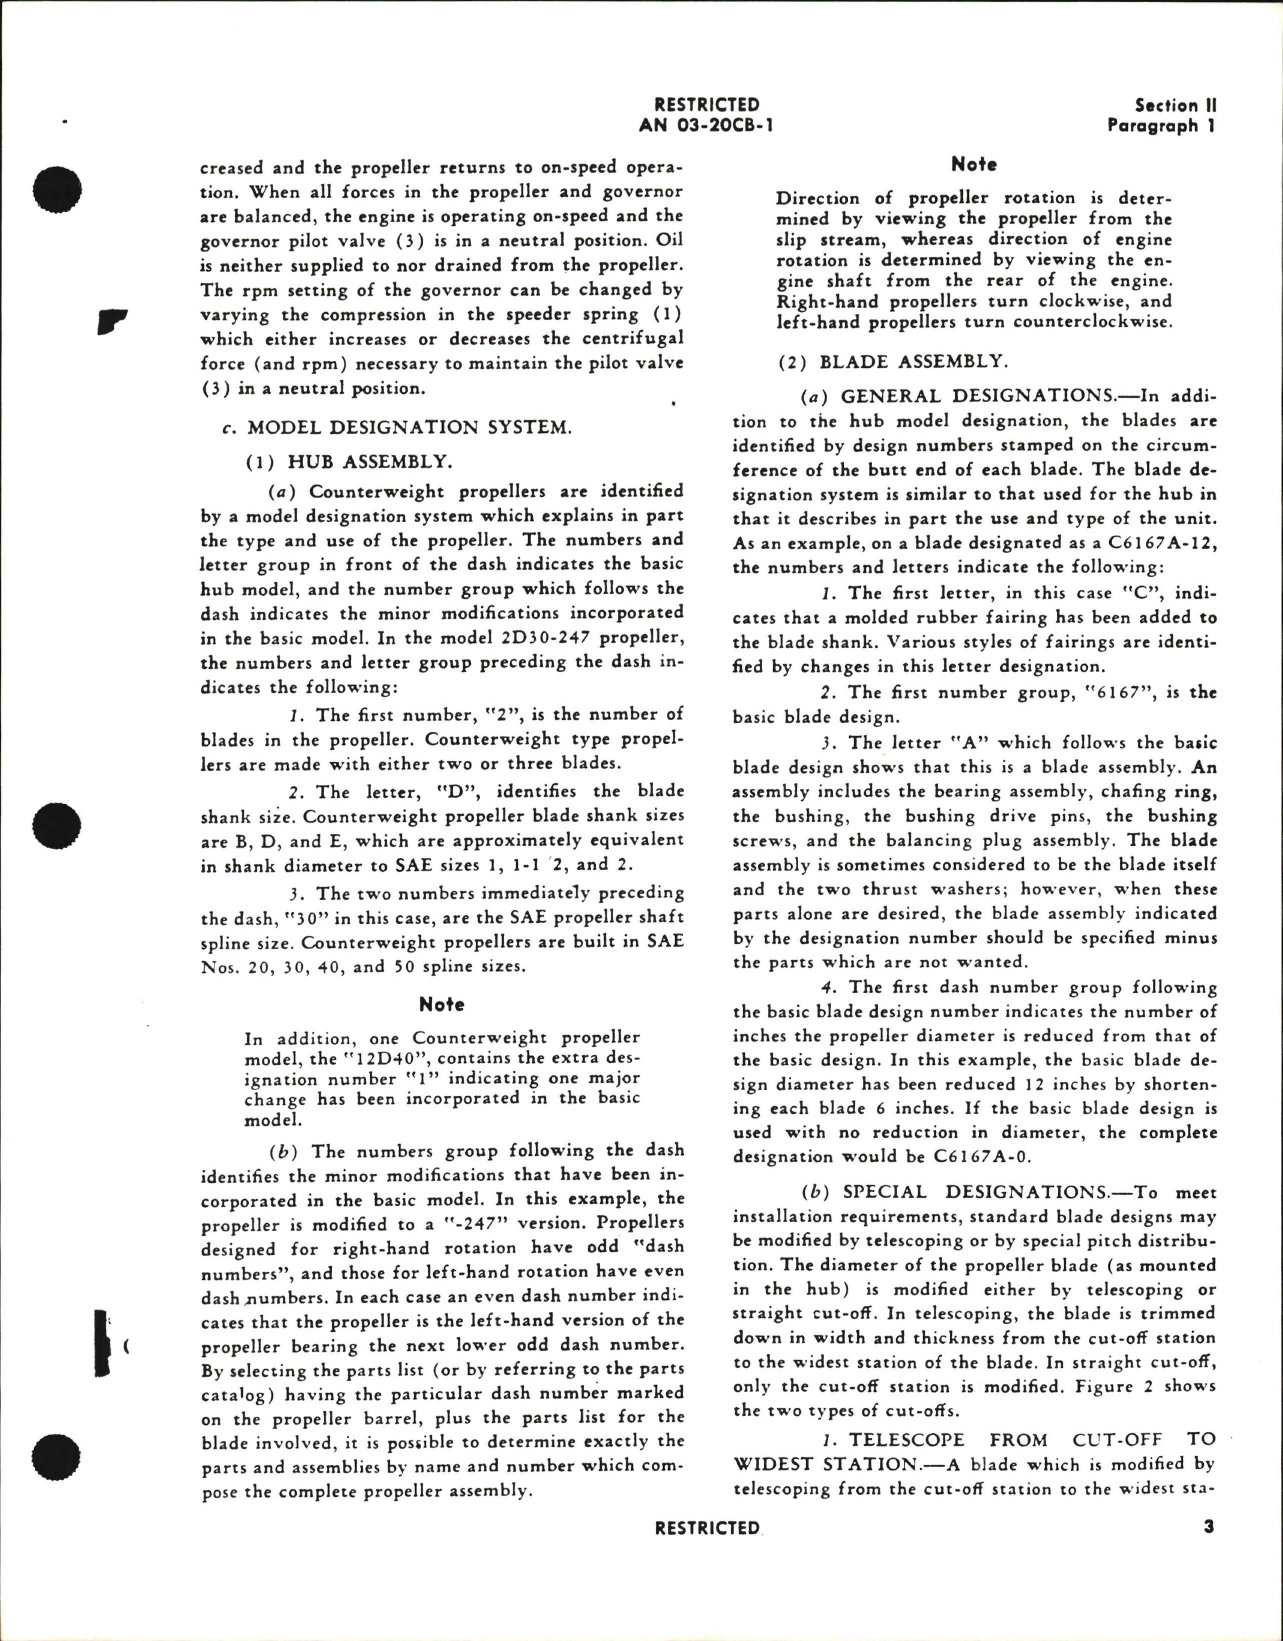 Sample page 7 from AirCorps Library document: Operation, Service, & Overhaul Instructions for Counterweight Props 2B20, 2D30, 2E40, 3D40, 3E50, & 12D40